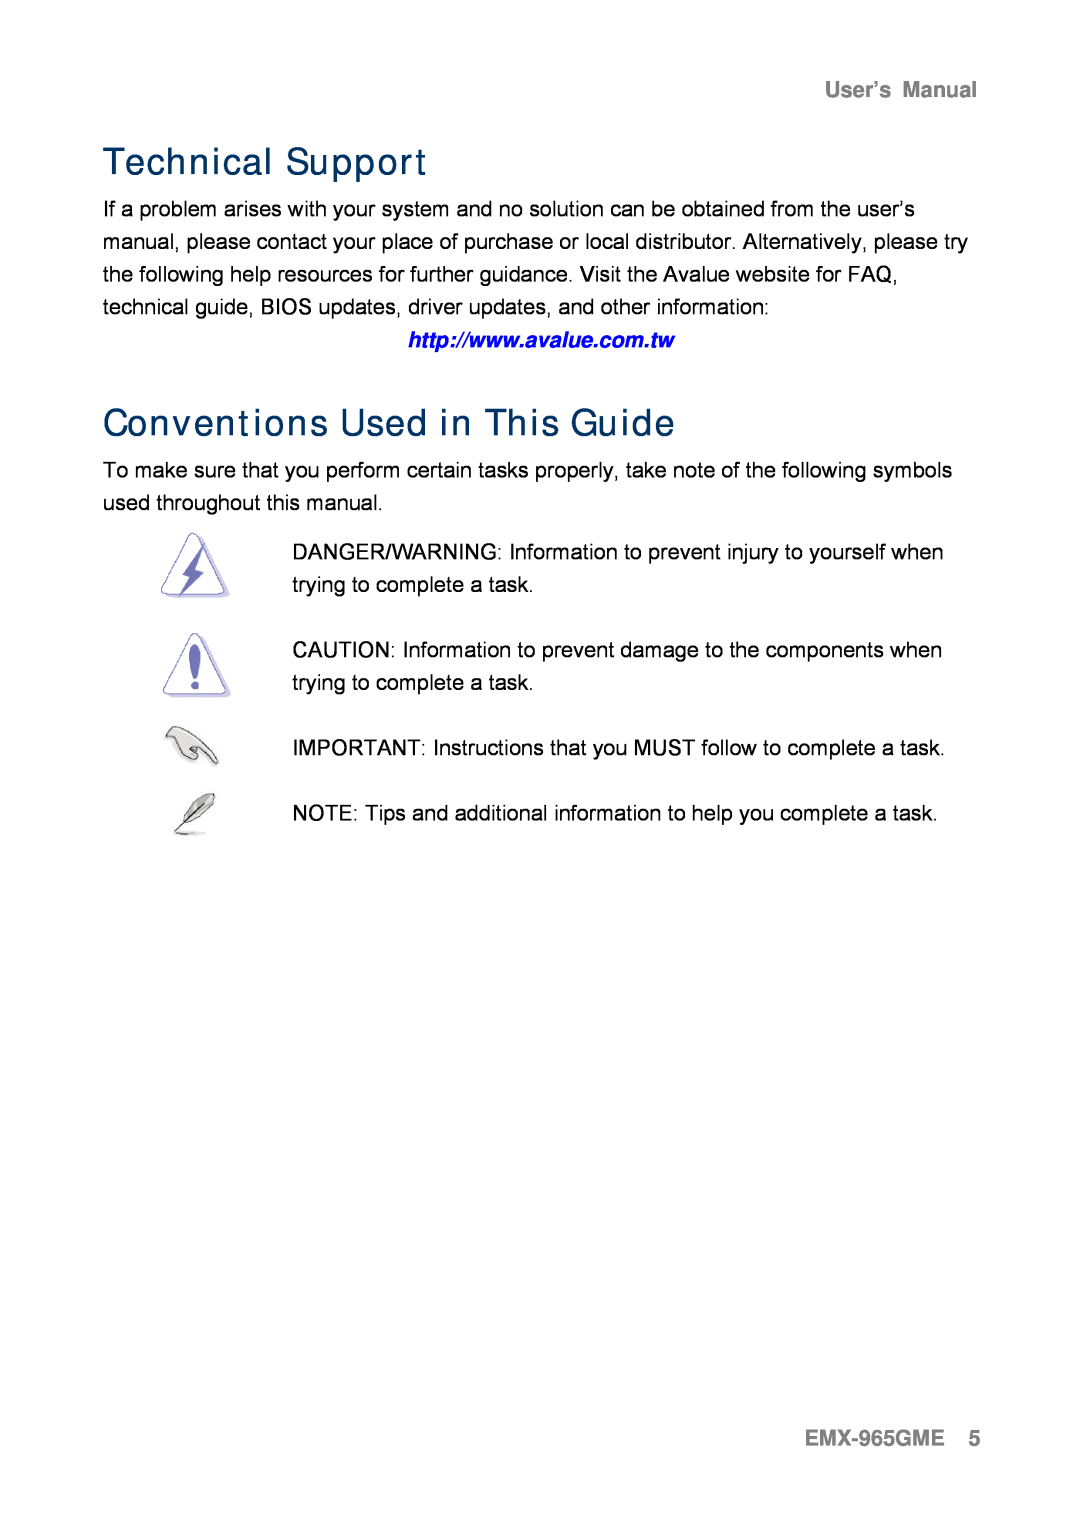 Intel user manual Technical Support, Conventions Used in This Guide, EMX-965GME5, User’s Manual 